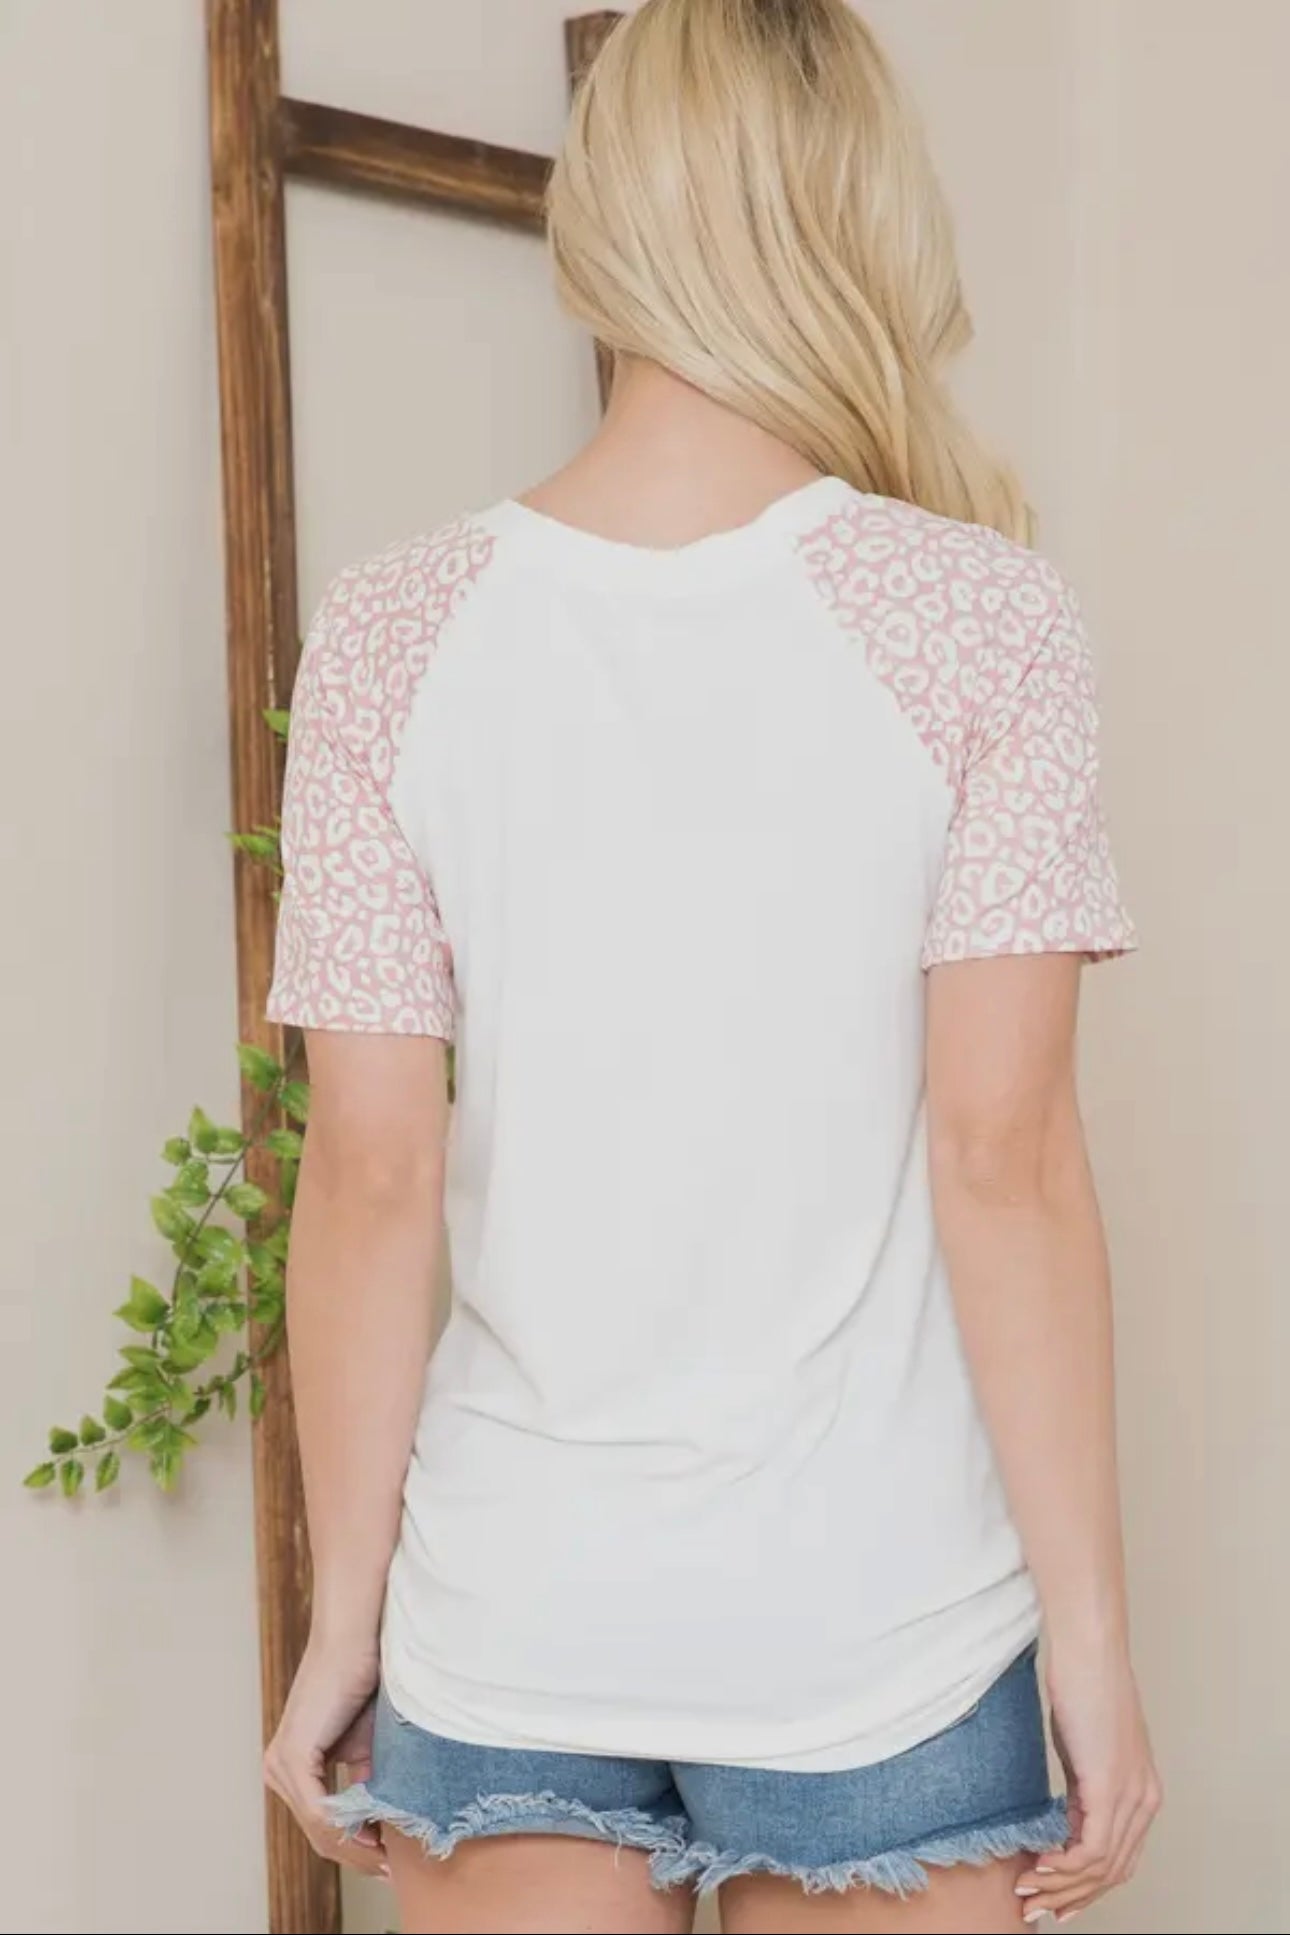 Ivory Stretchy Tee with Pink Leopard Print Short Sleeves